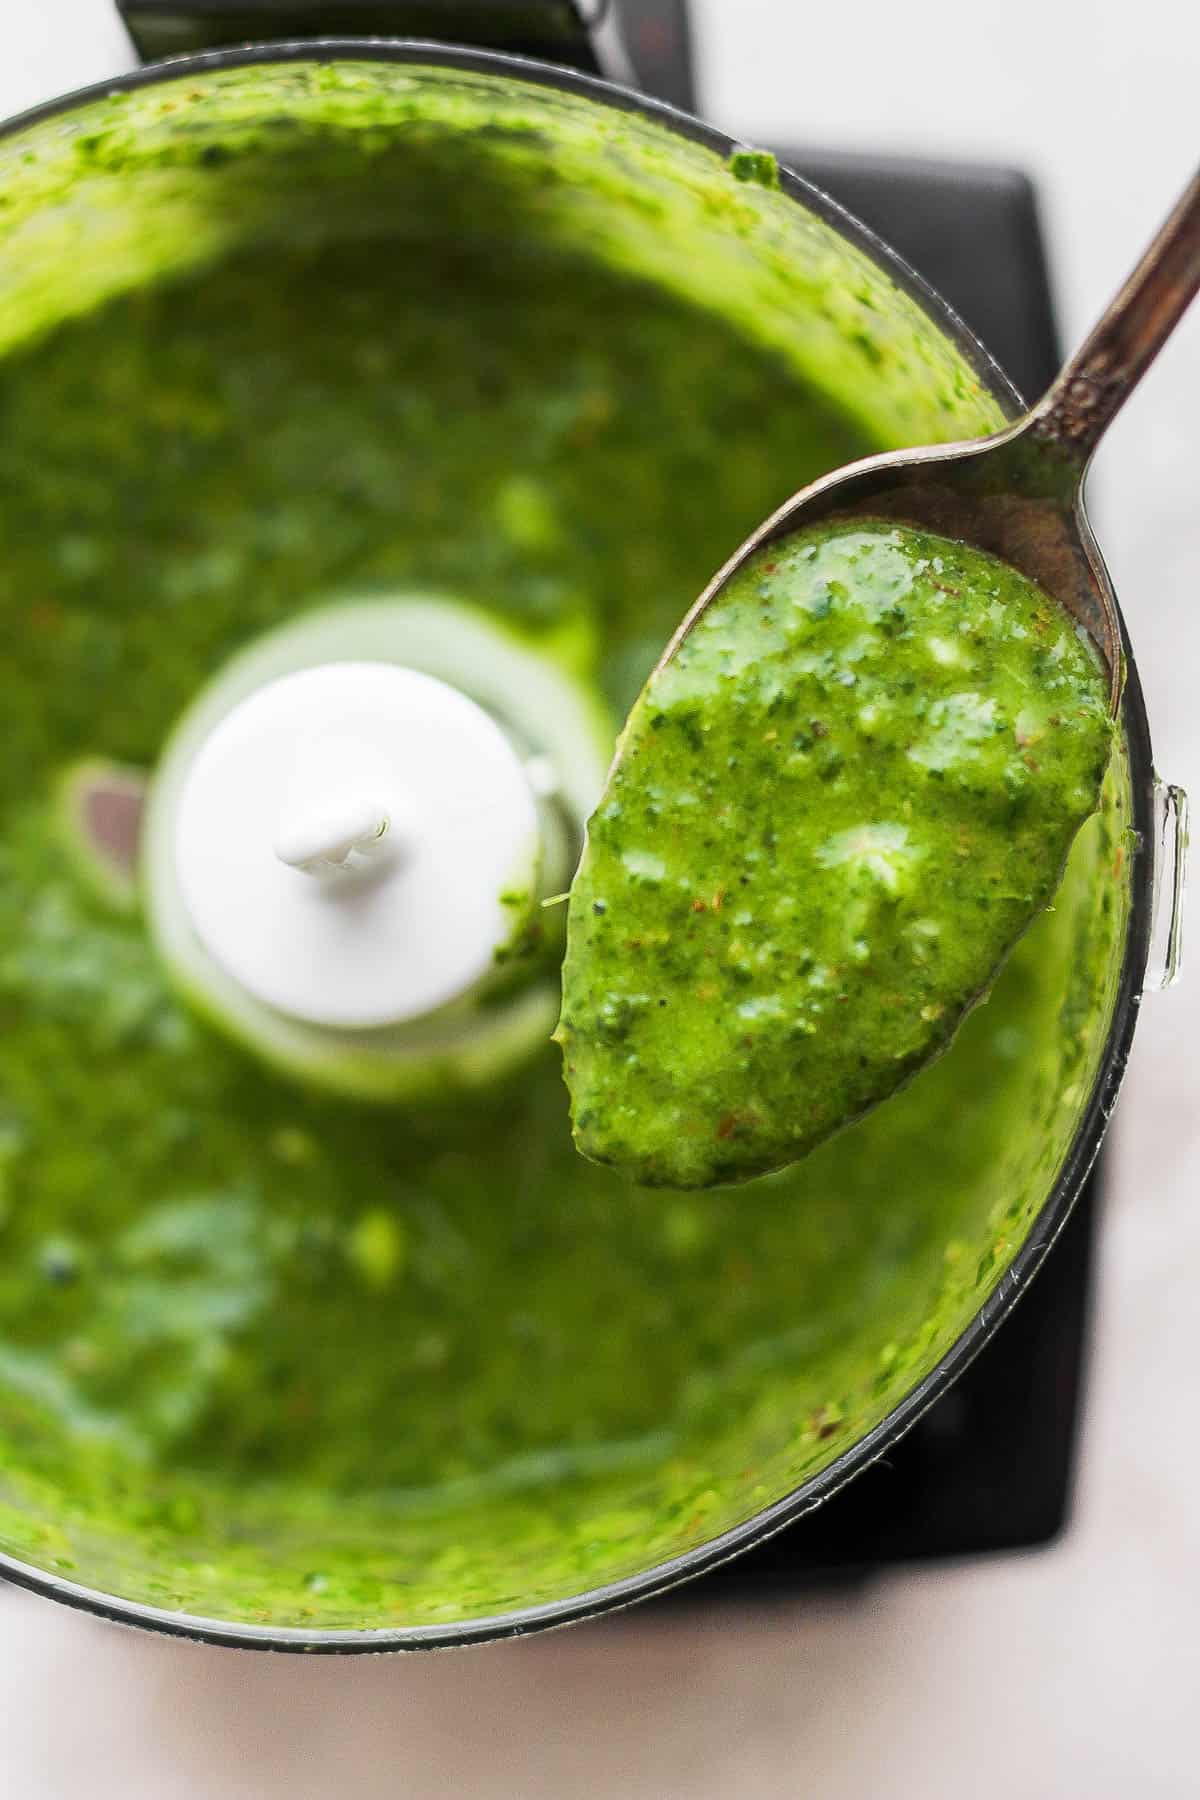 Mint chimichurri in a food processor with a spoon scooping out a bit.